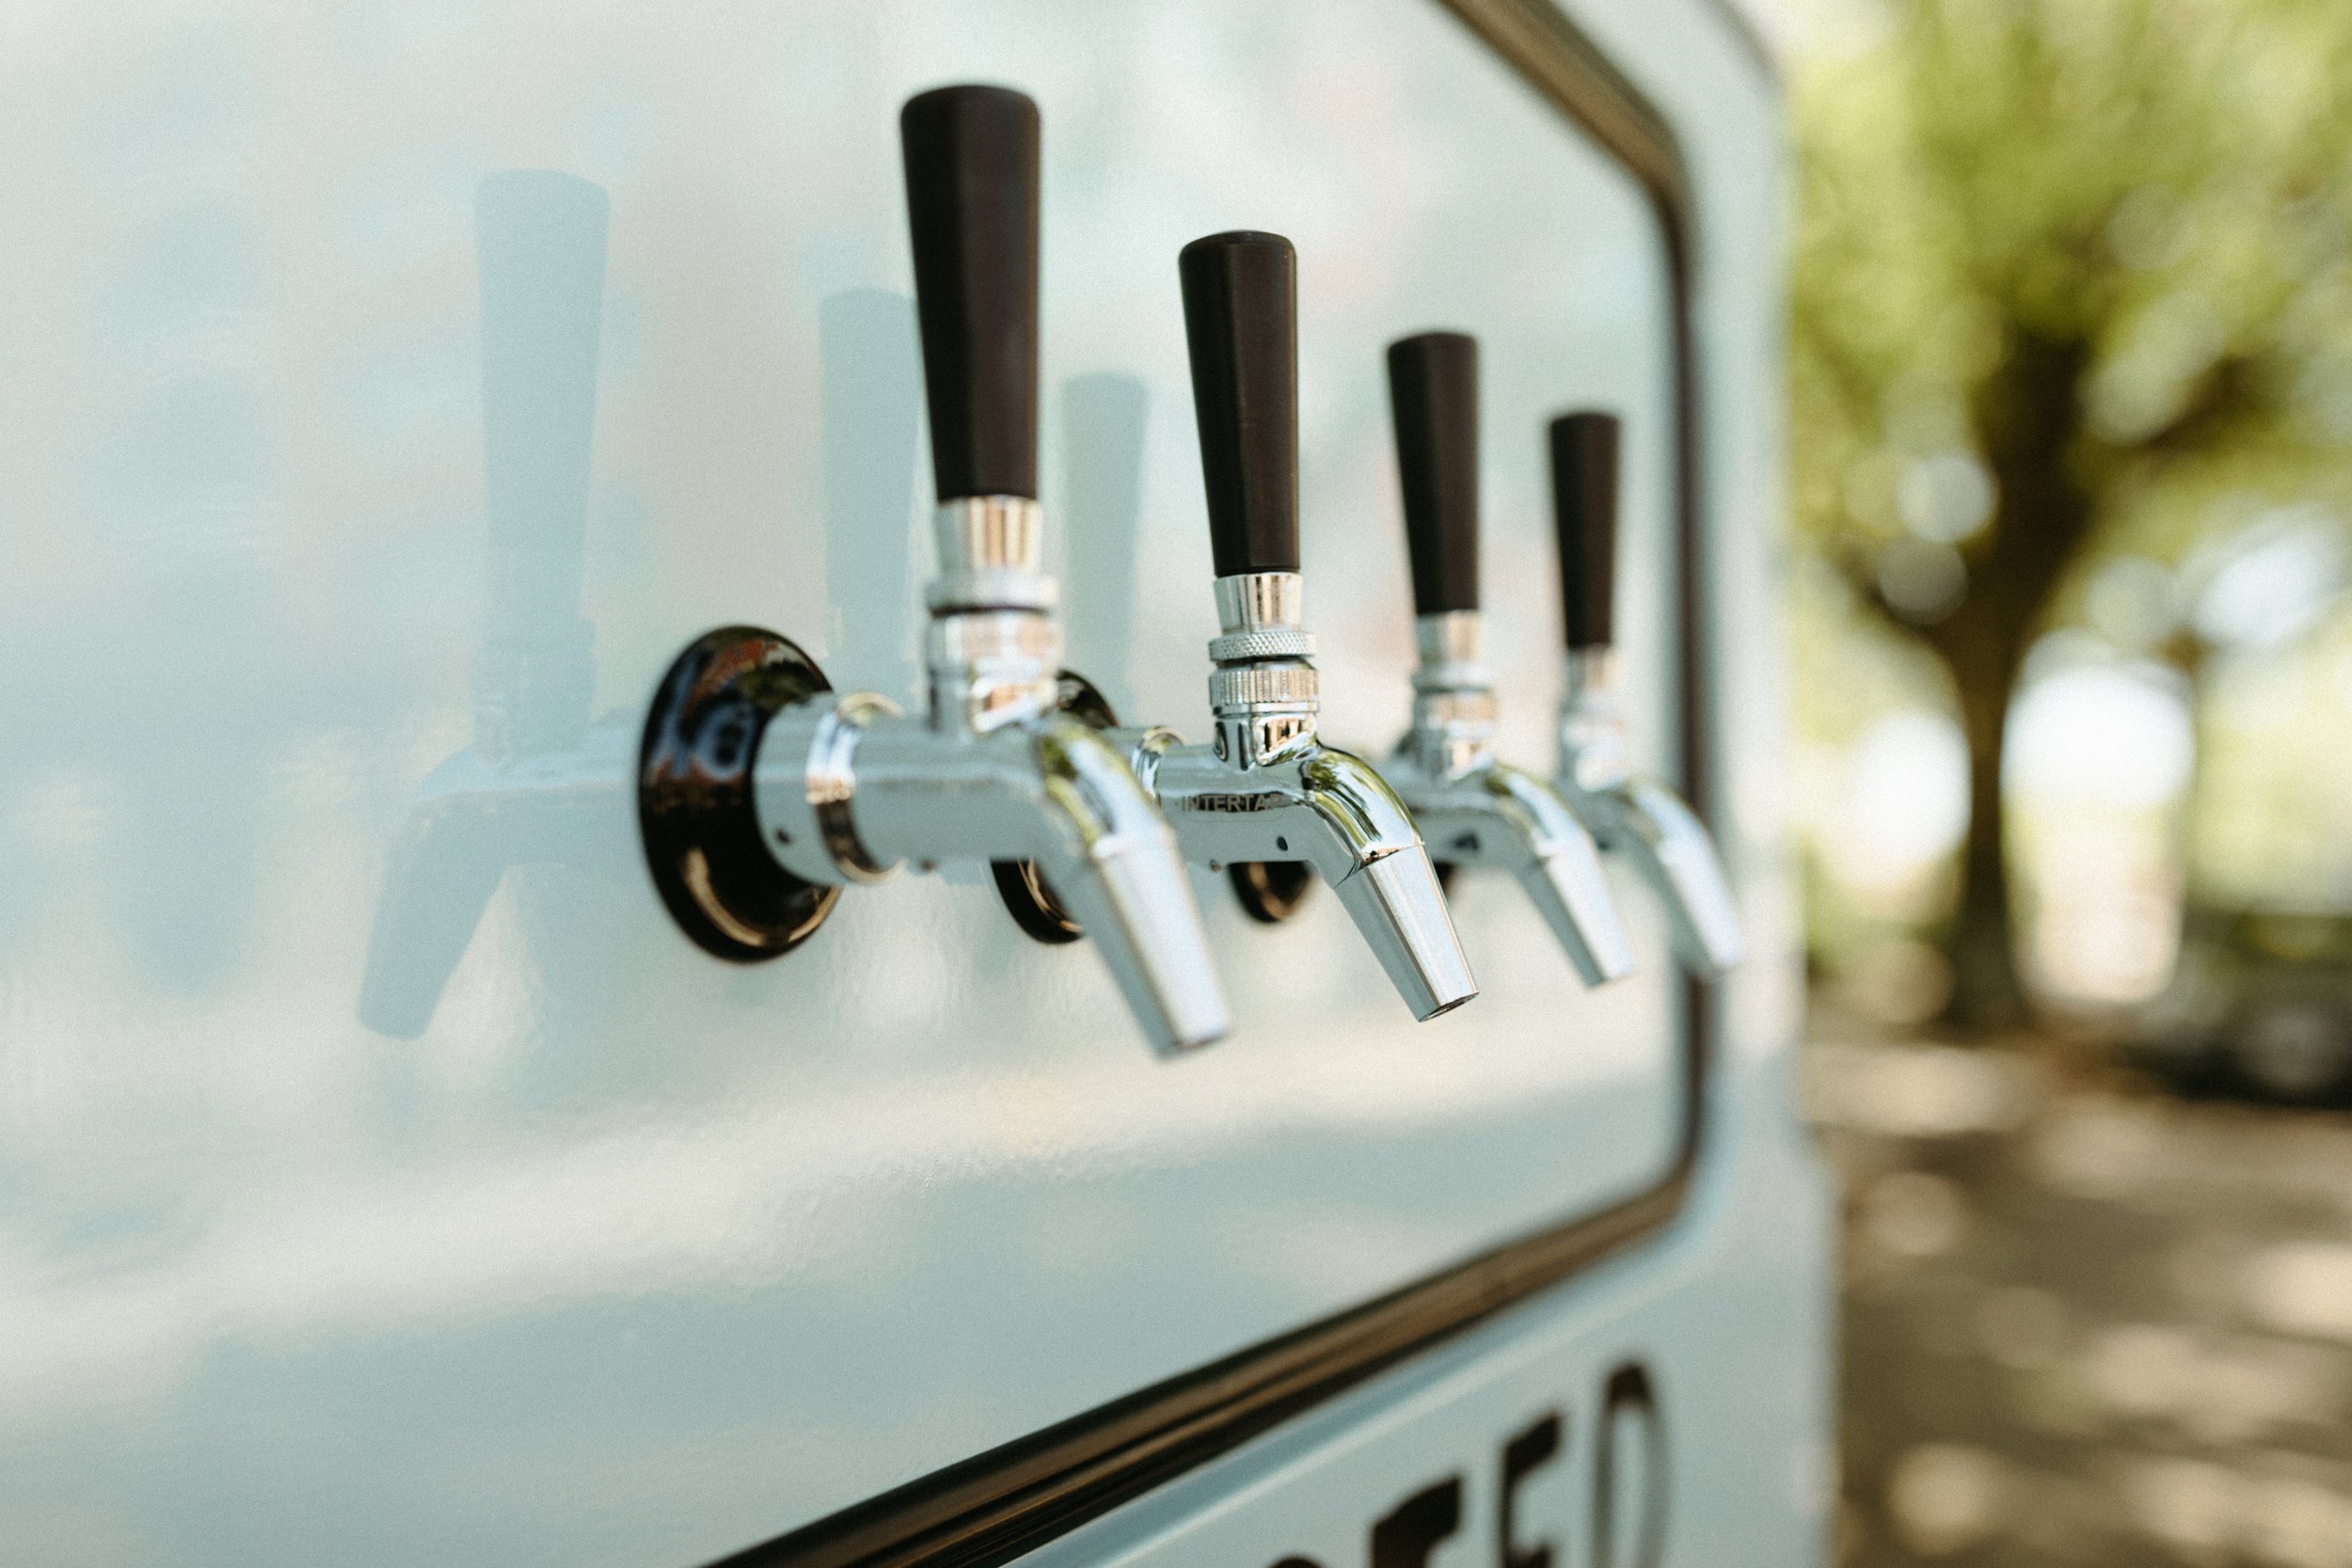 olsted-tap-truck-branding-session-knoxville-tori-lynne-photography-30.jpg